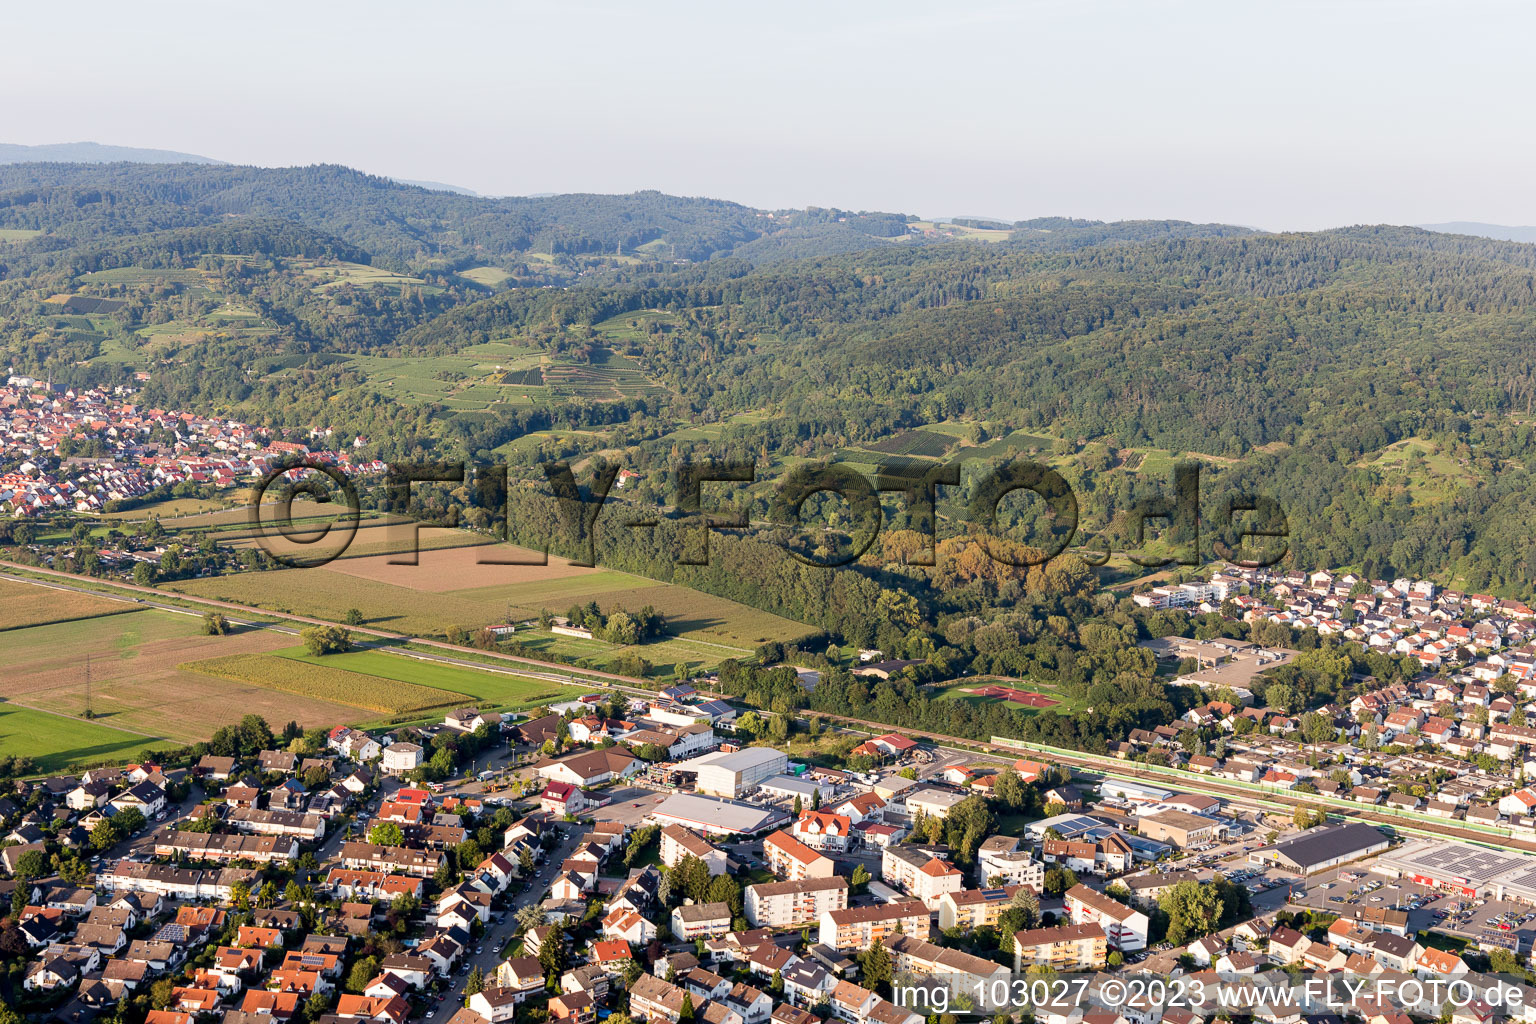 Hemsbach in the state Baden-Wuerttemberg, Germany seen from a drone